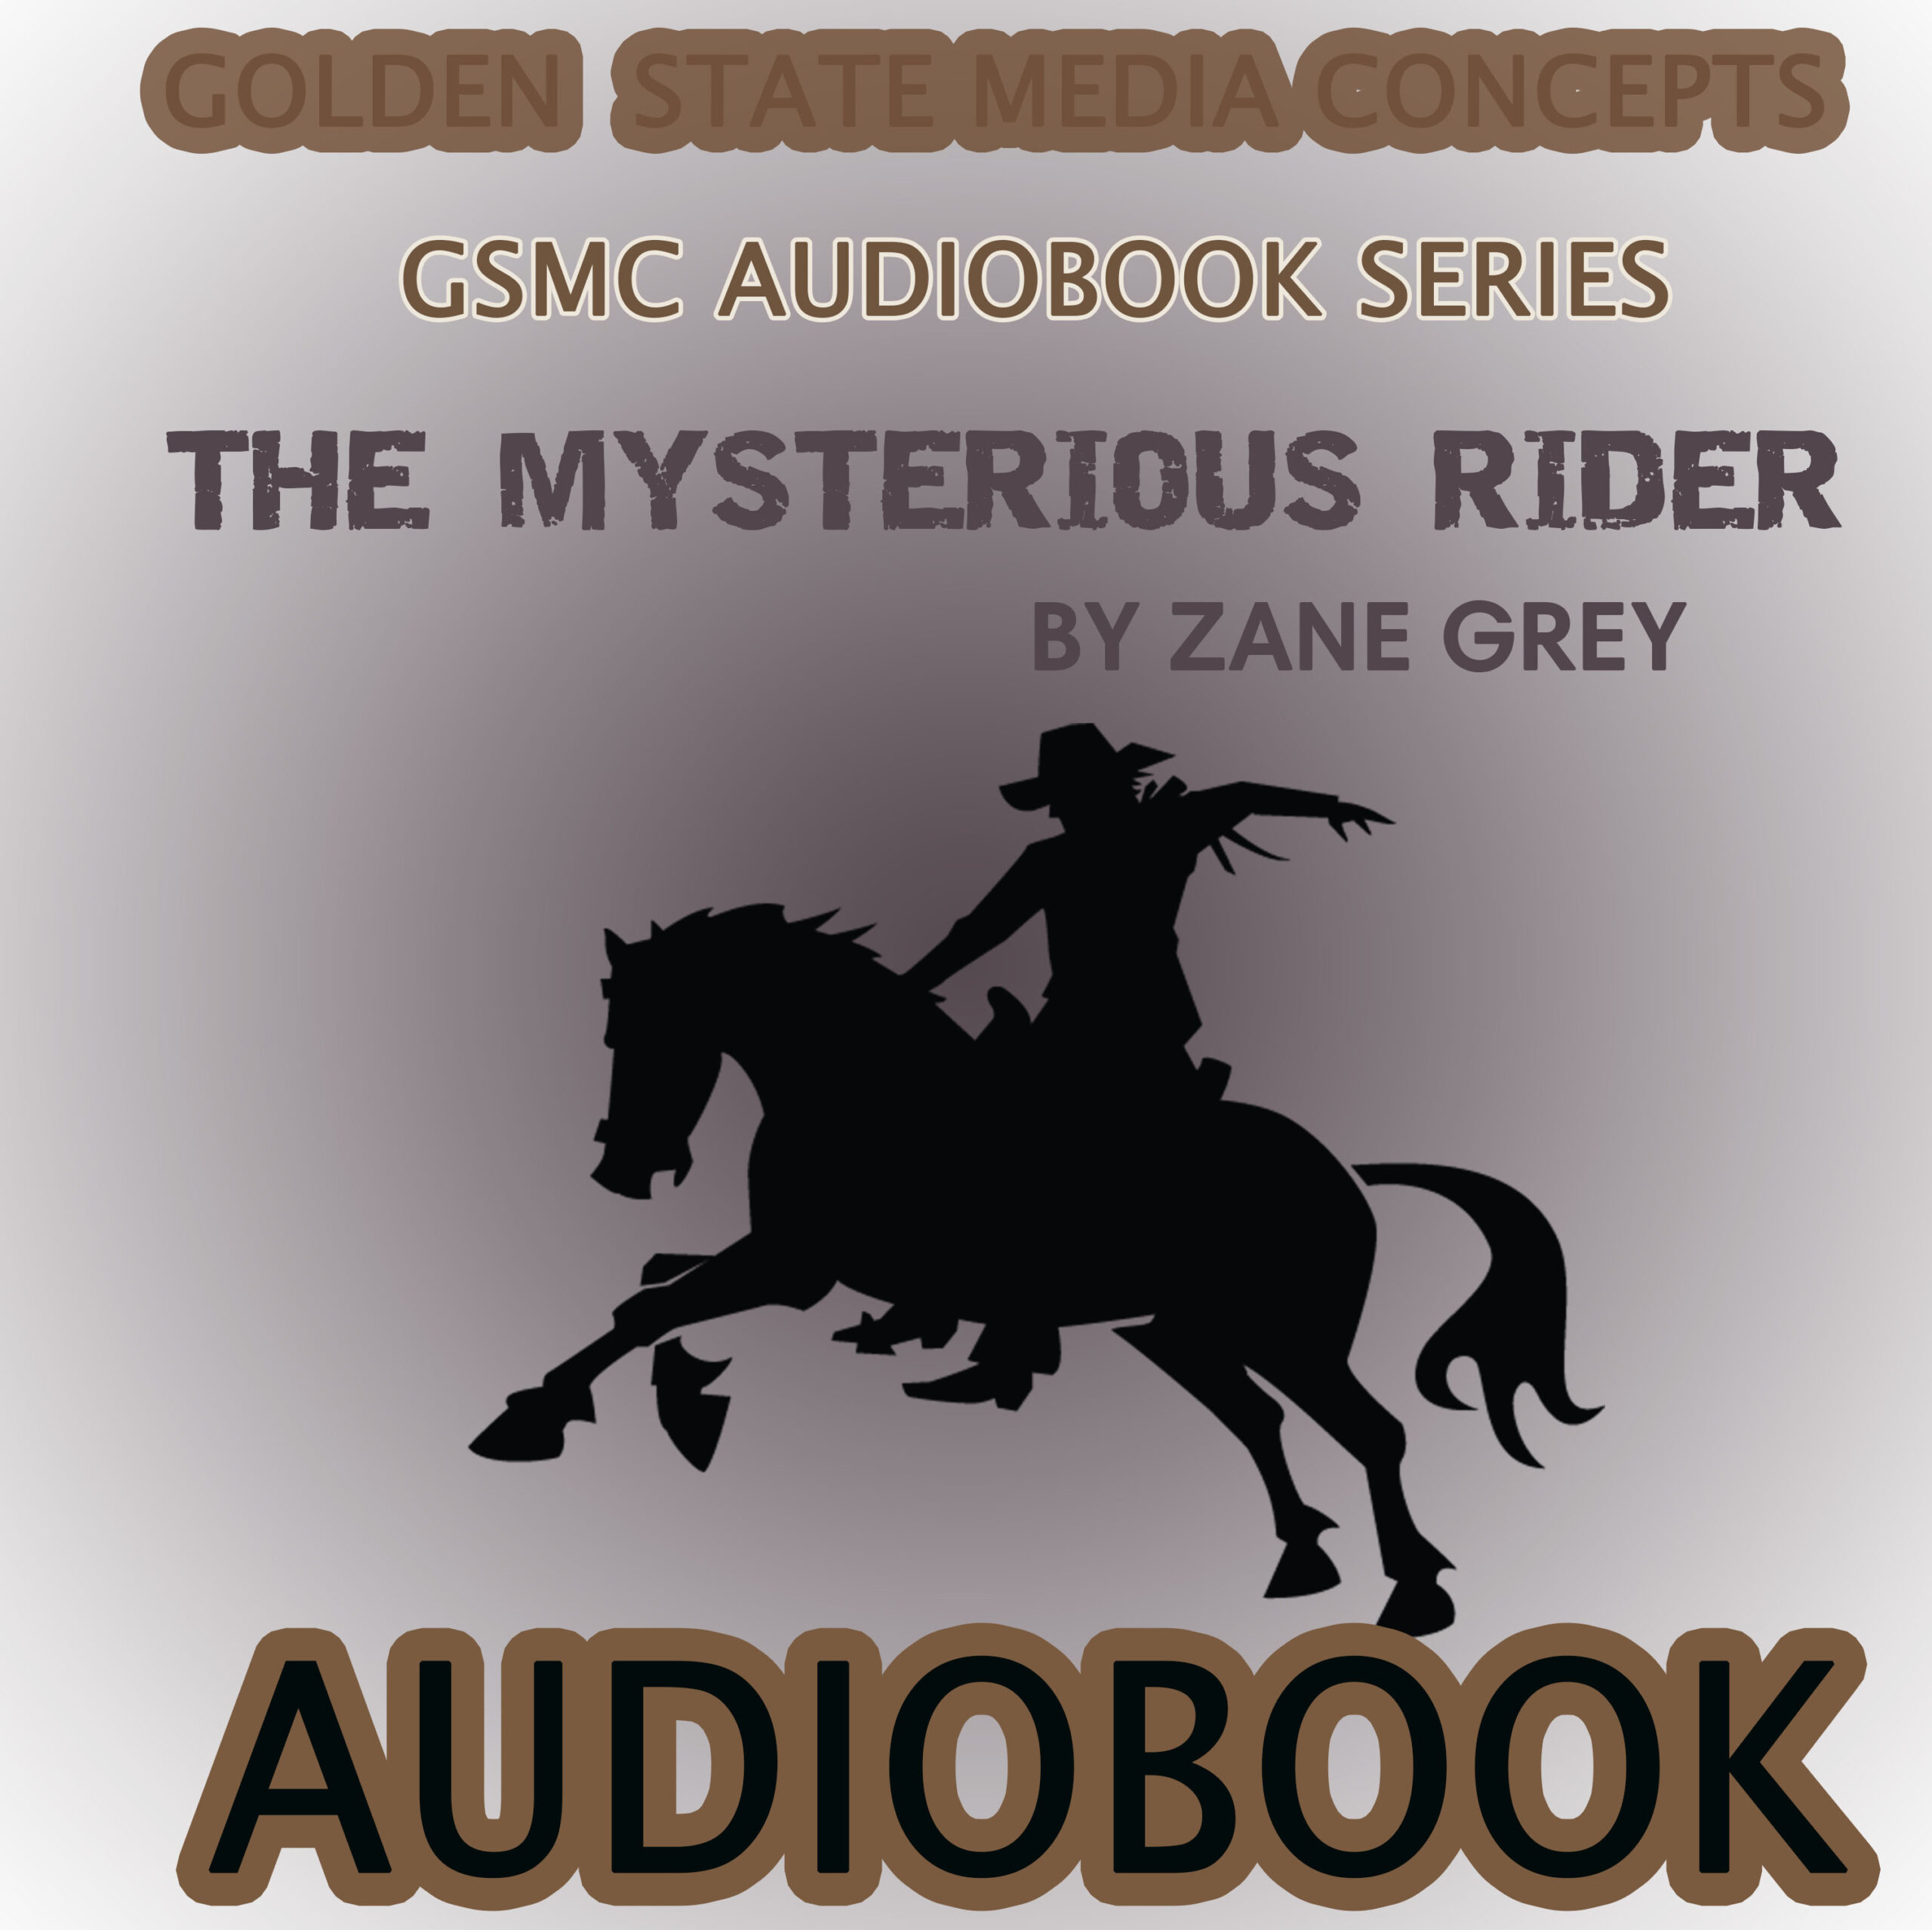 GSMC Audiobook Series: The Mysterious Rider